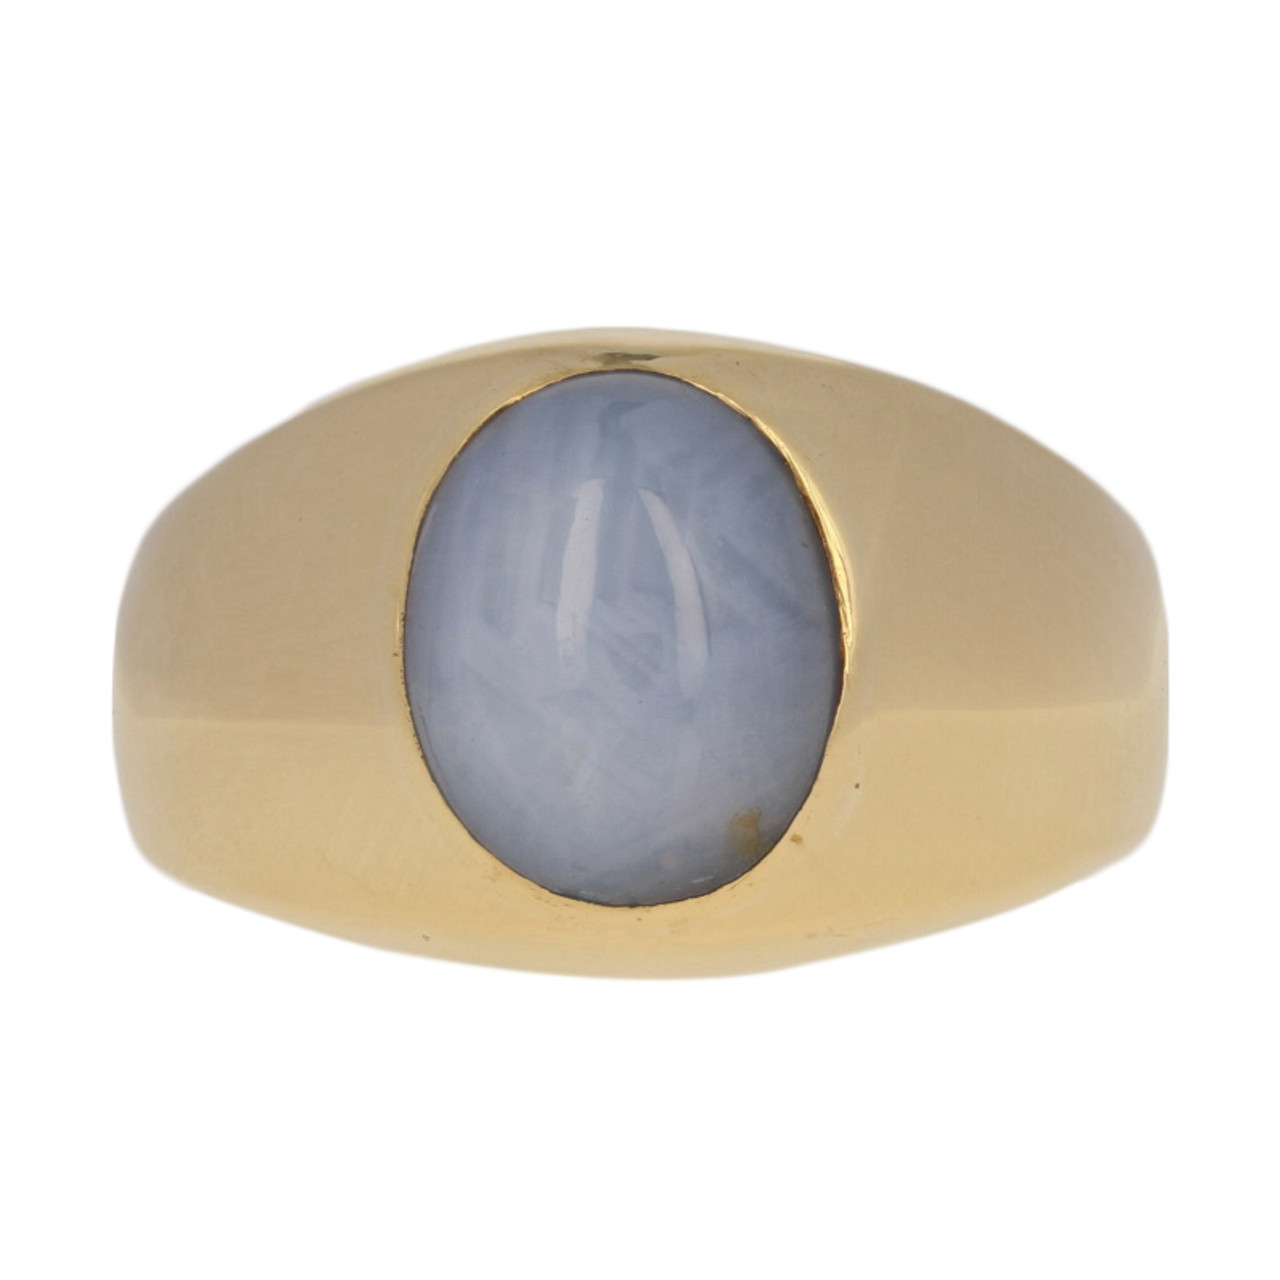 White gold ring H. Stern Blue size 57 MM in White gold - 29090376